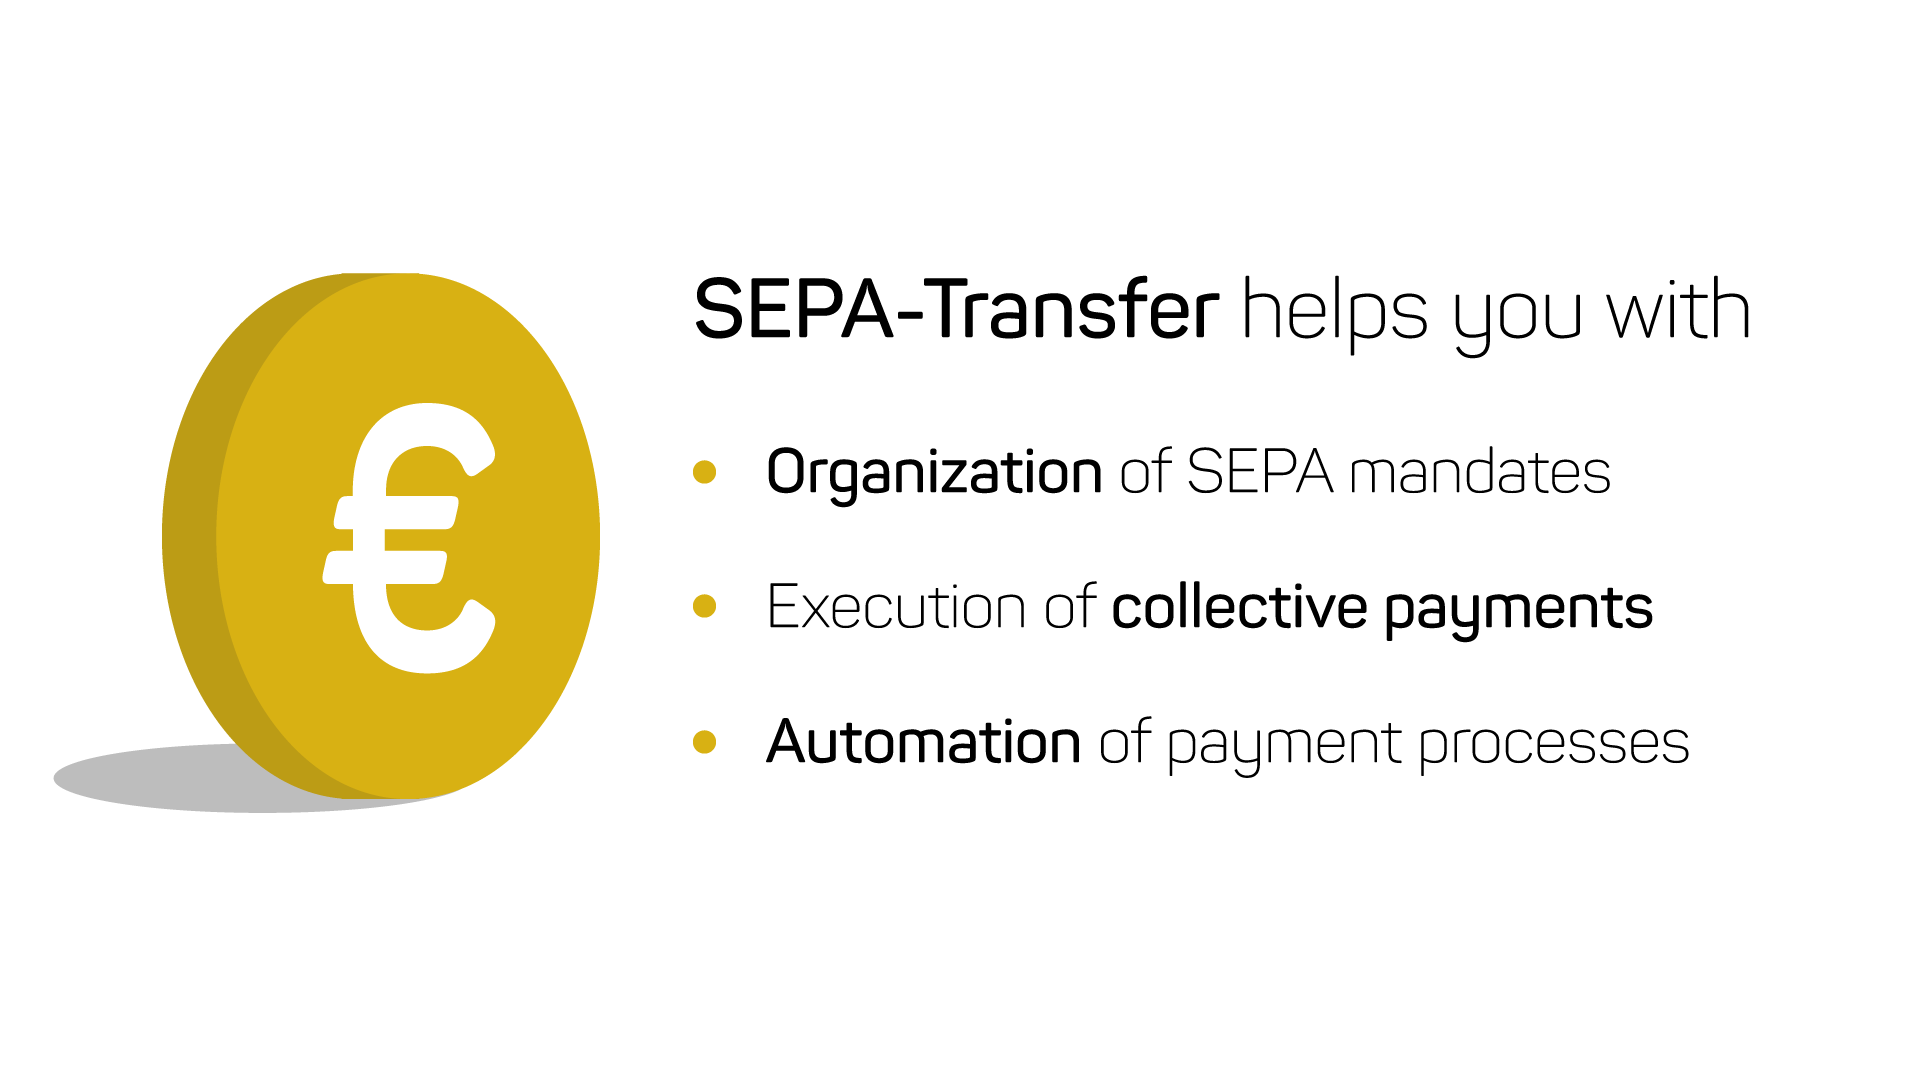 SEPA-Transfer helps you automate your payment processes